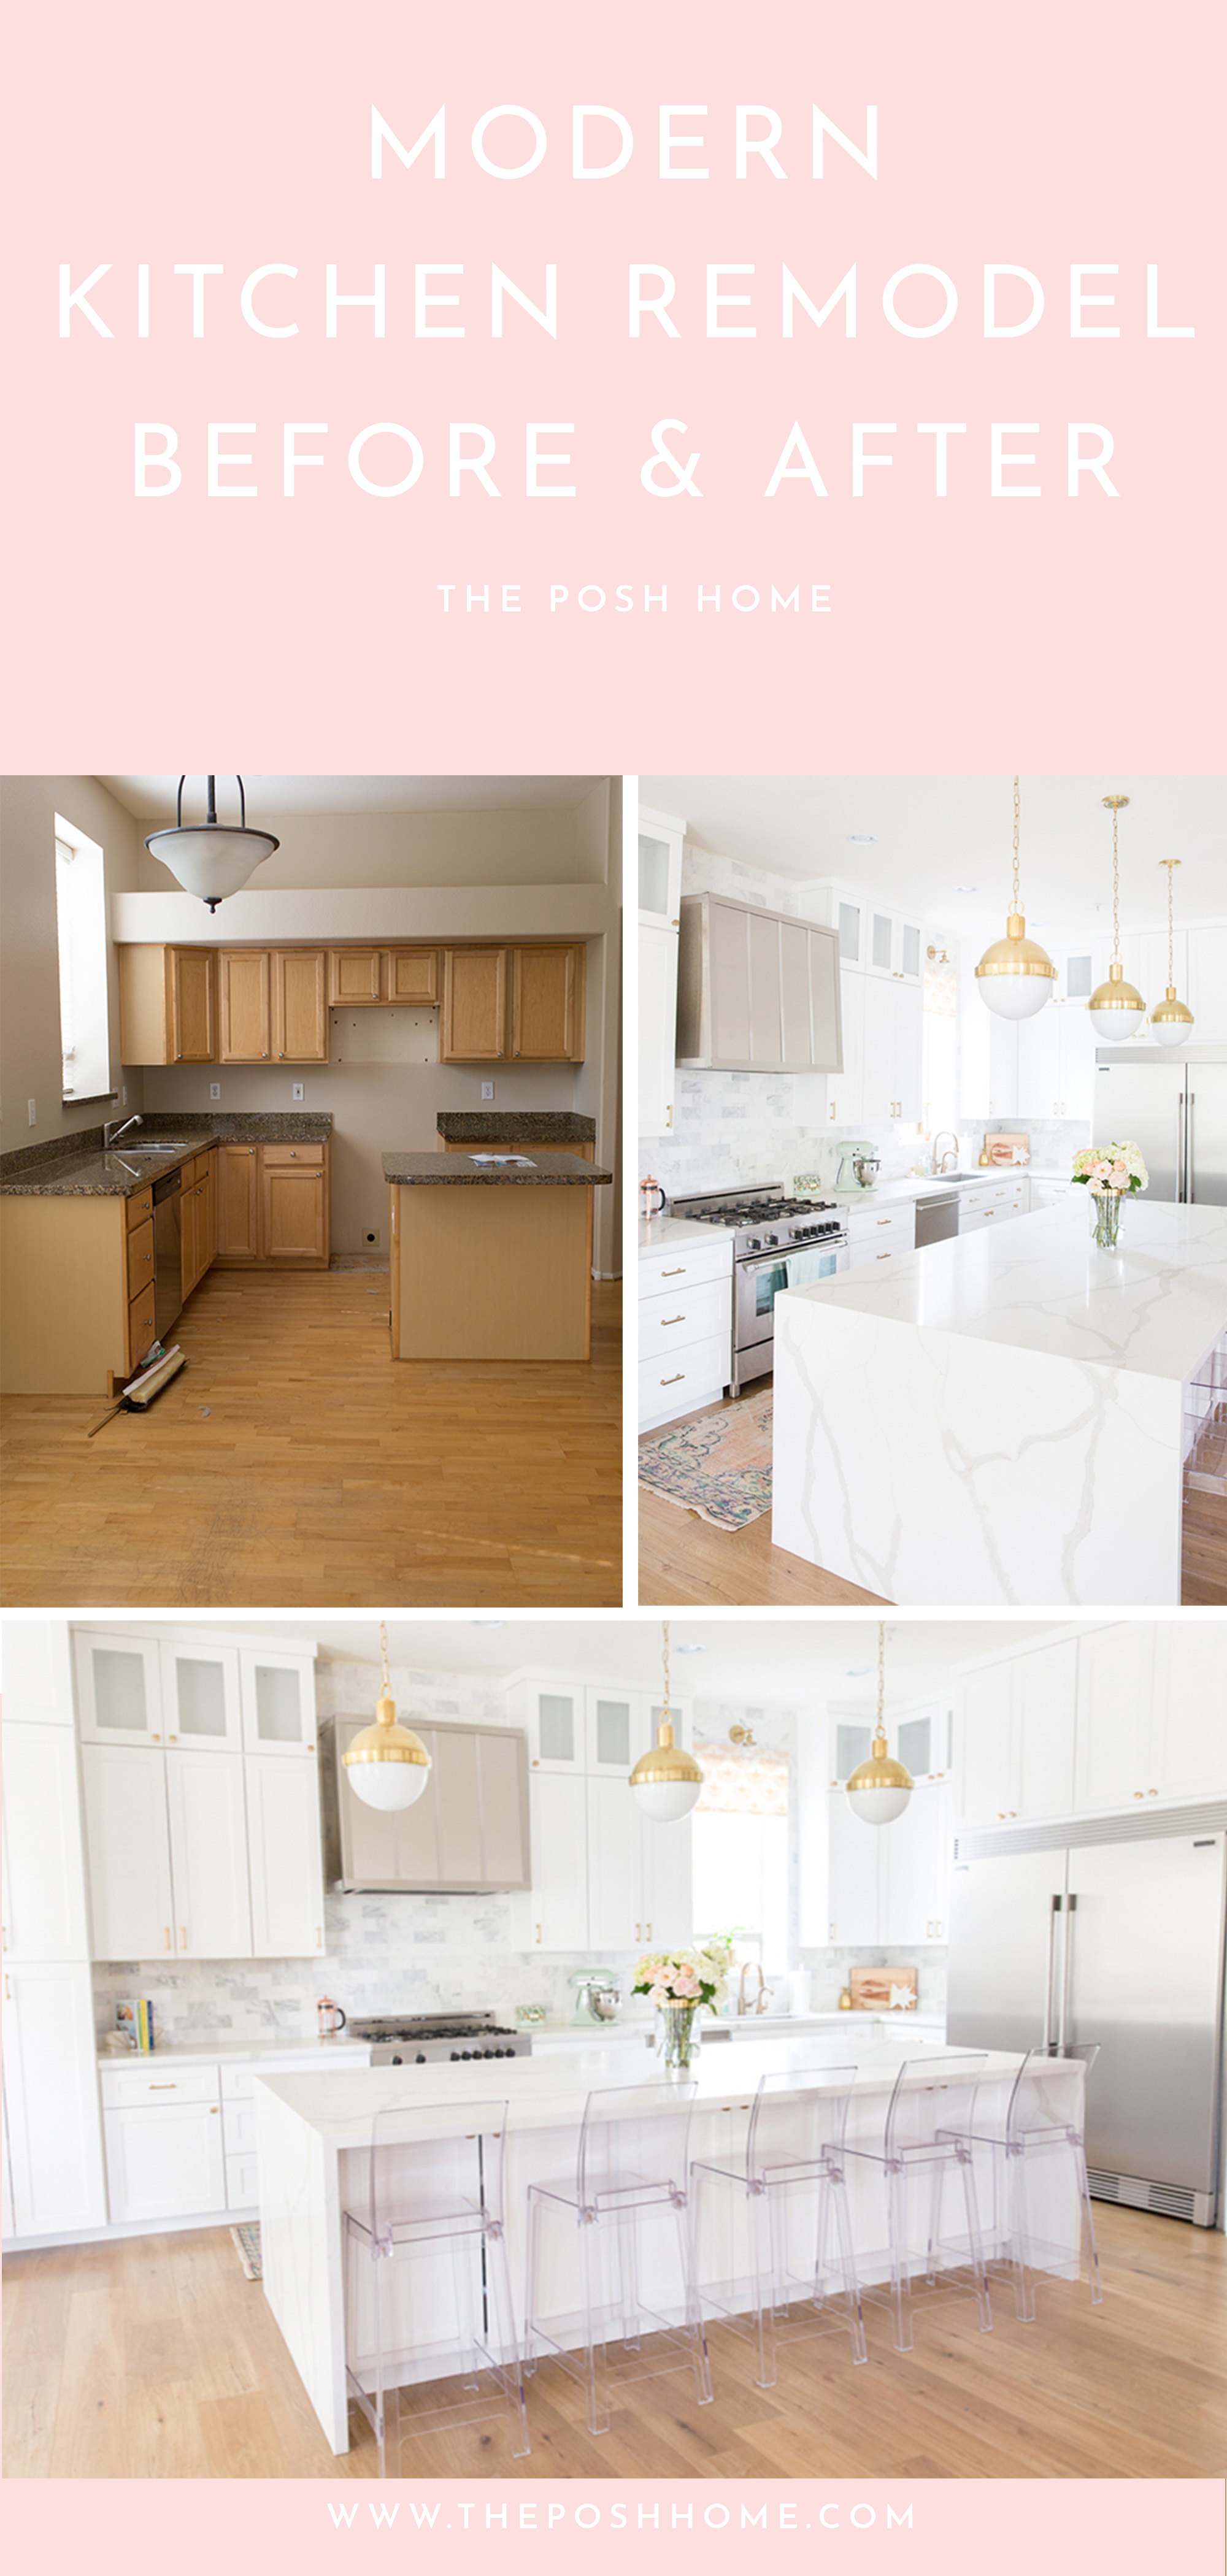 MODERN KITCHEN REMODEL BEFORE AND AFTER PINTEREST